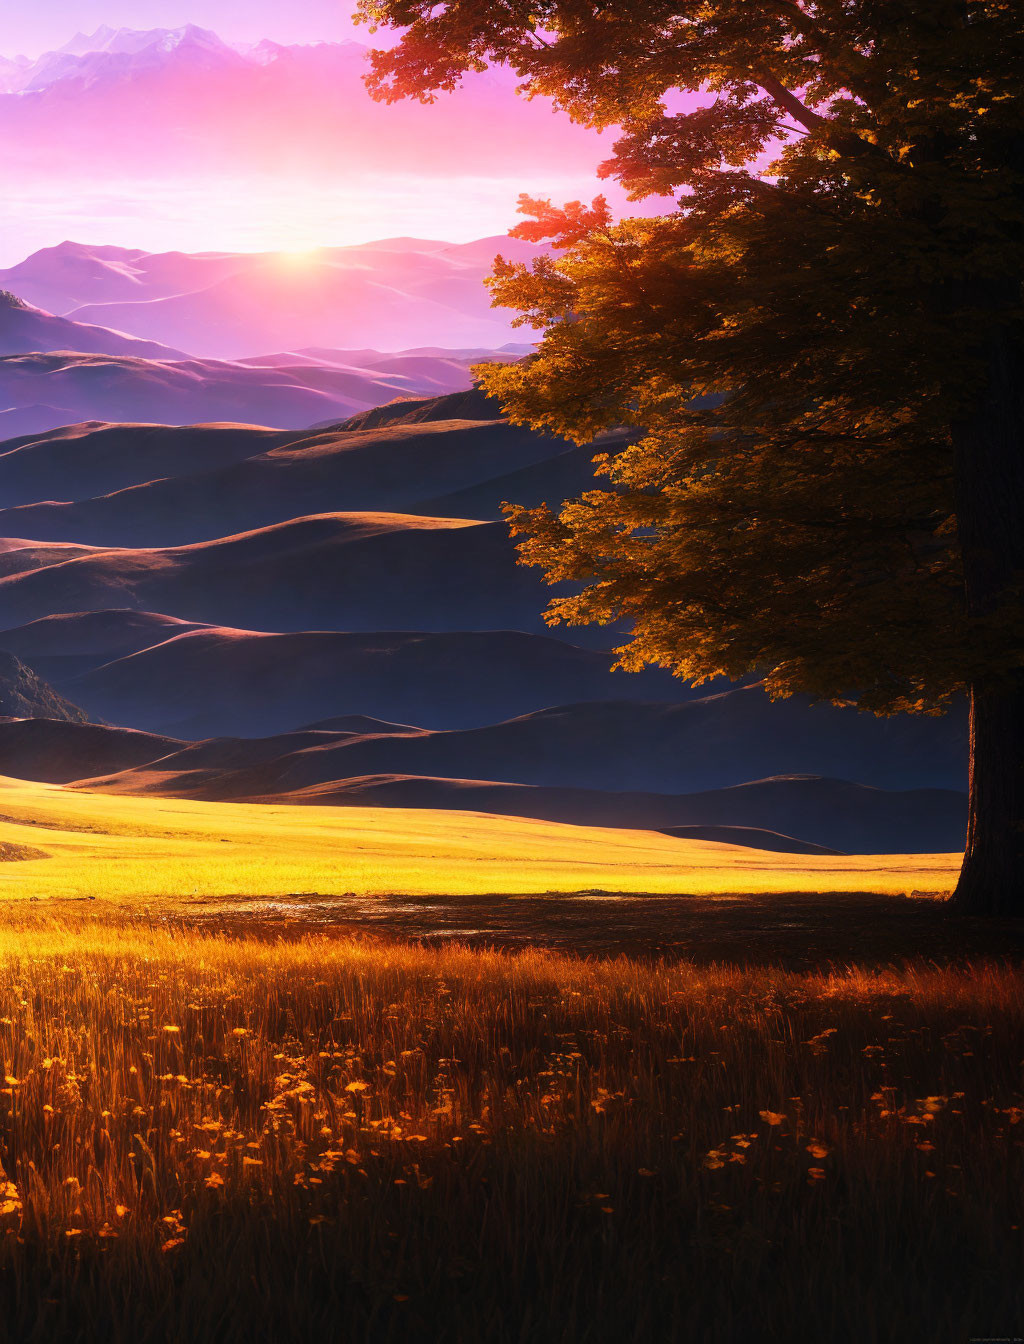 Tranquil field with solitary tree at sunrise over rolling hills